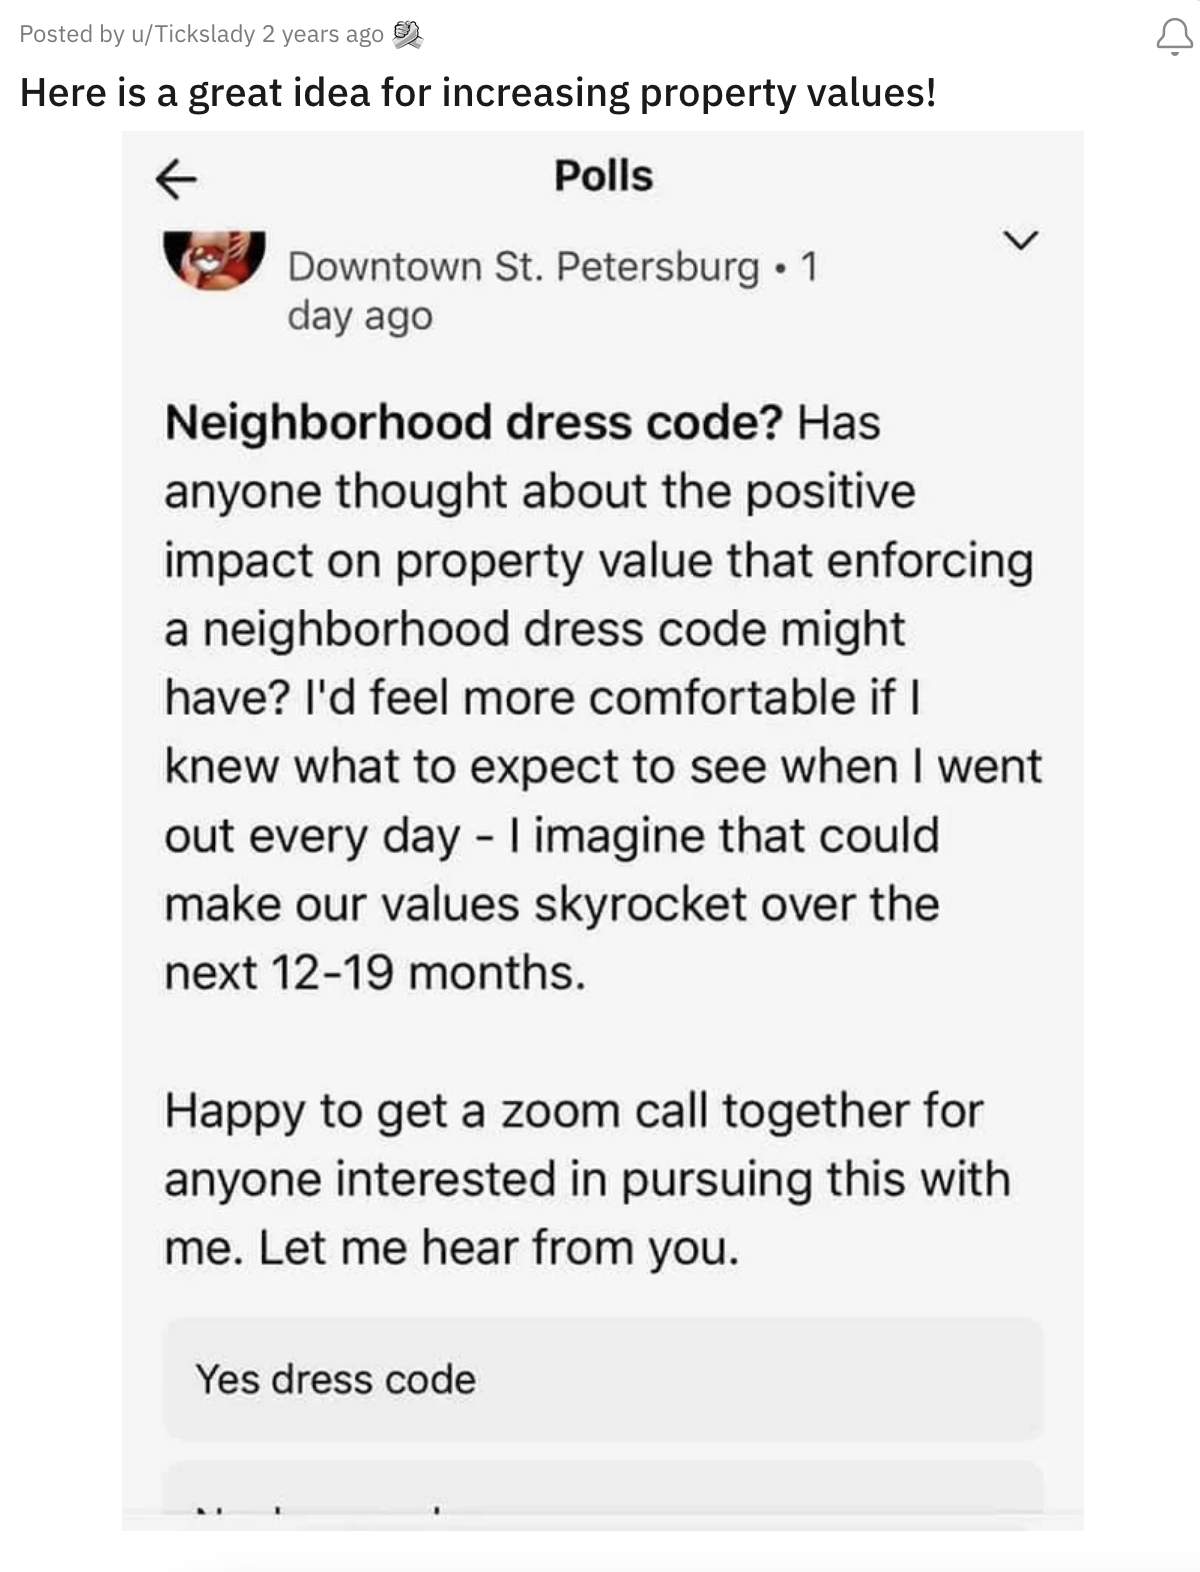 A neighbor suggesting enforcing a dress code